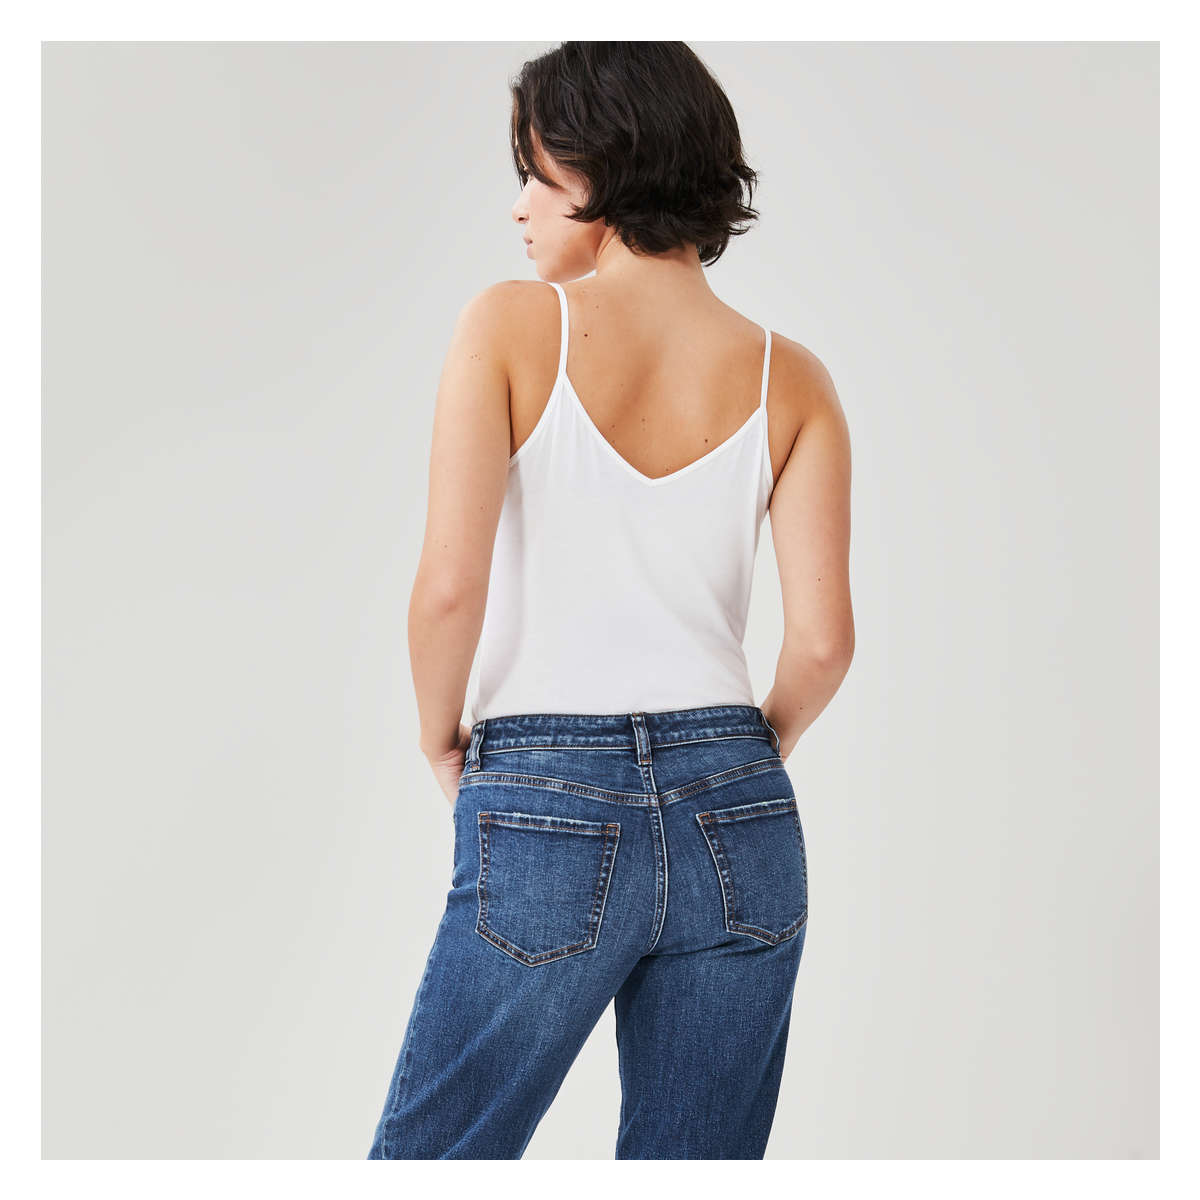 Everyday Relaxed Jeans - Aspen Wash